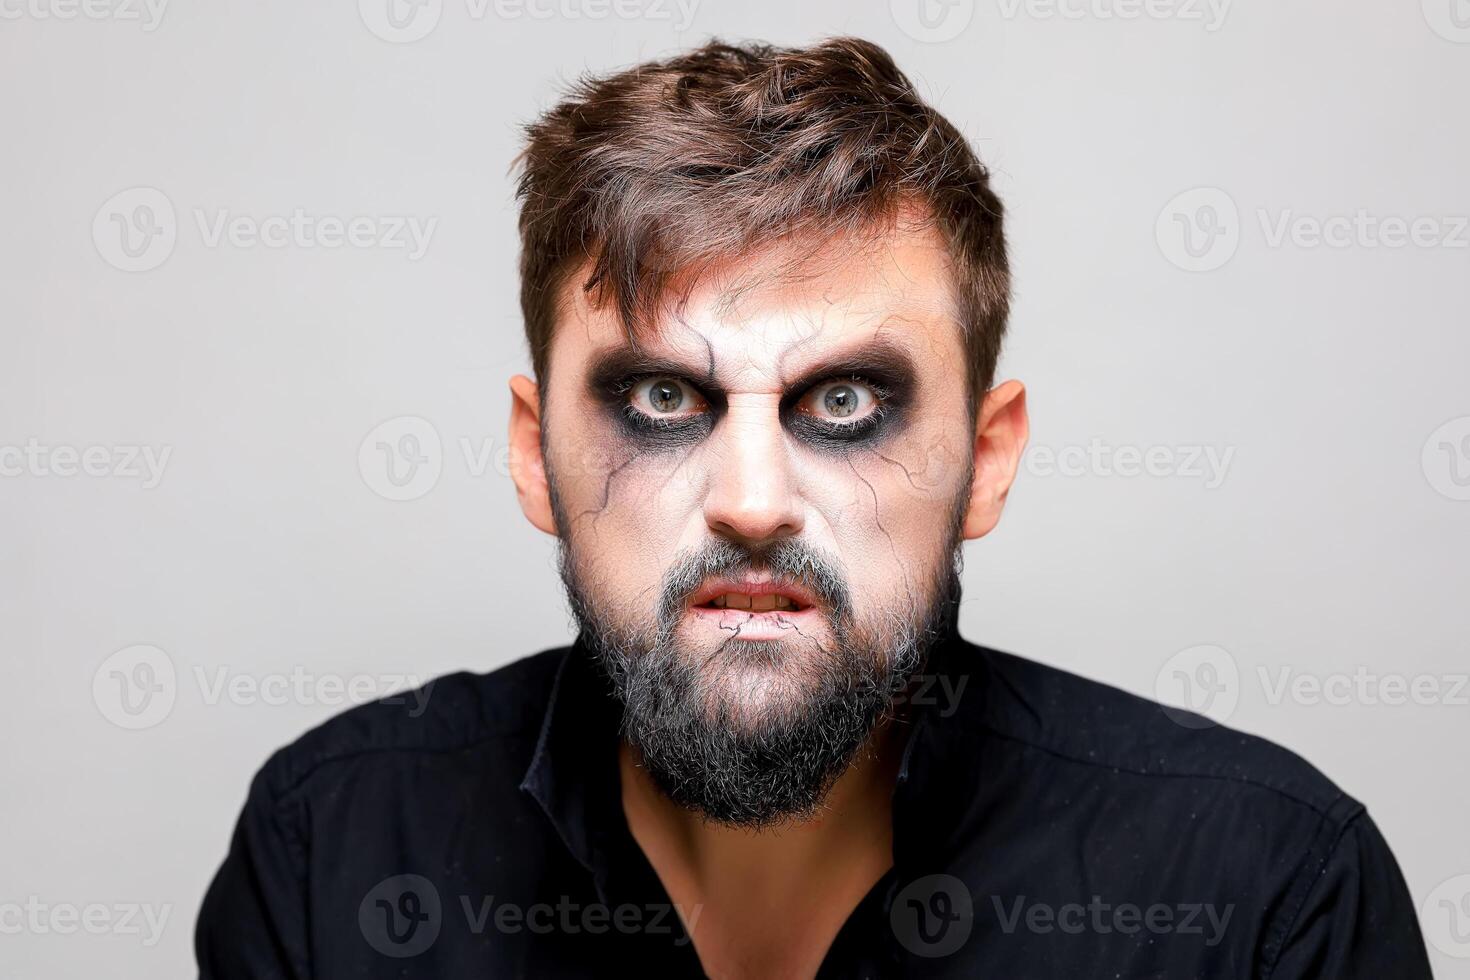 makeup for a bearded man for the feast of all saints Halloween in the style of the undead photo